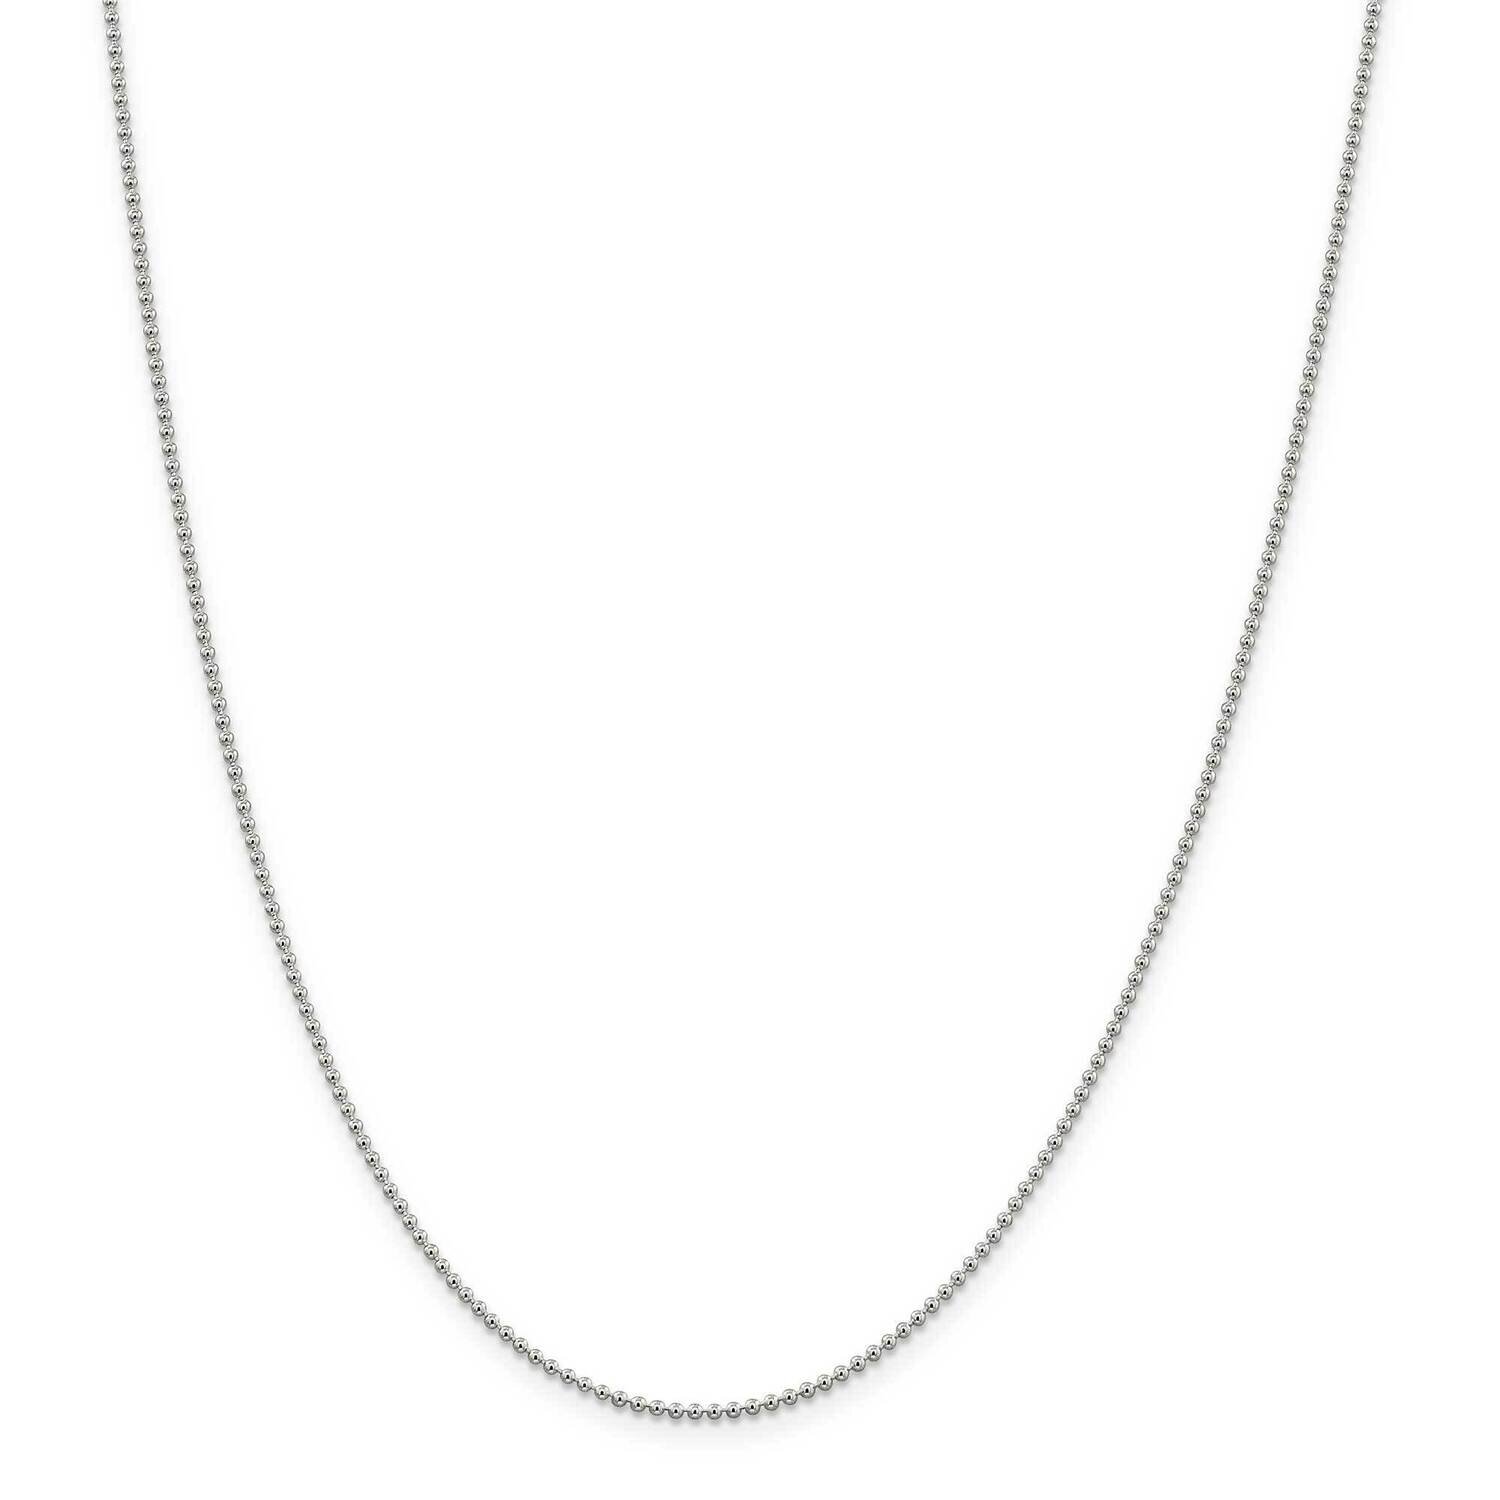 1.5mm Beaded Chain 26 Inch Sterling Silver QK81-26